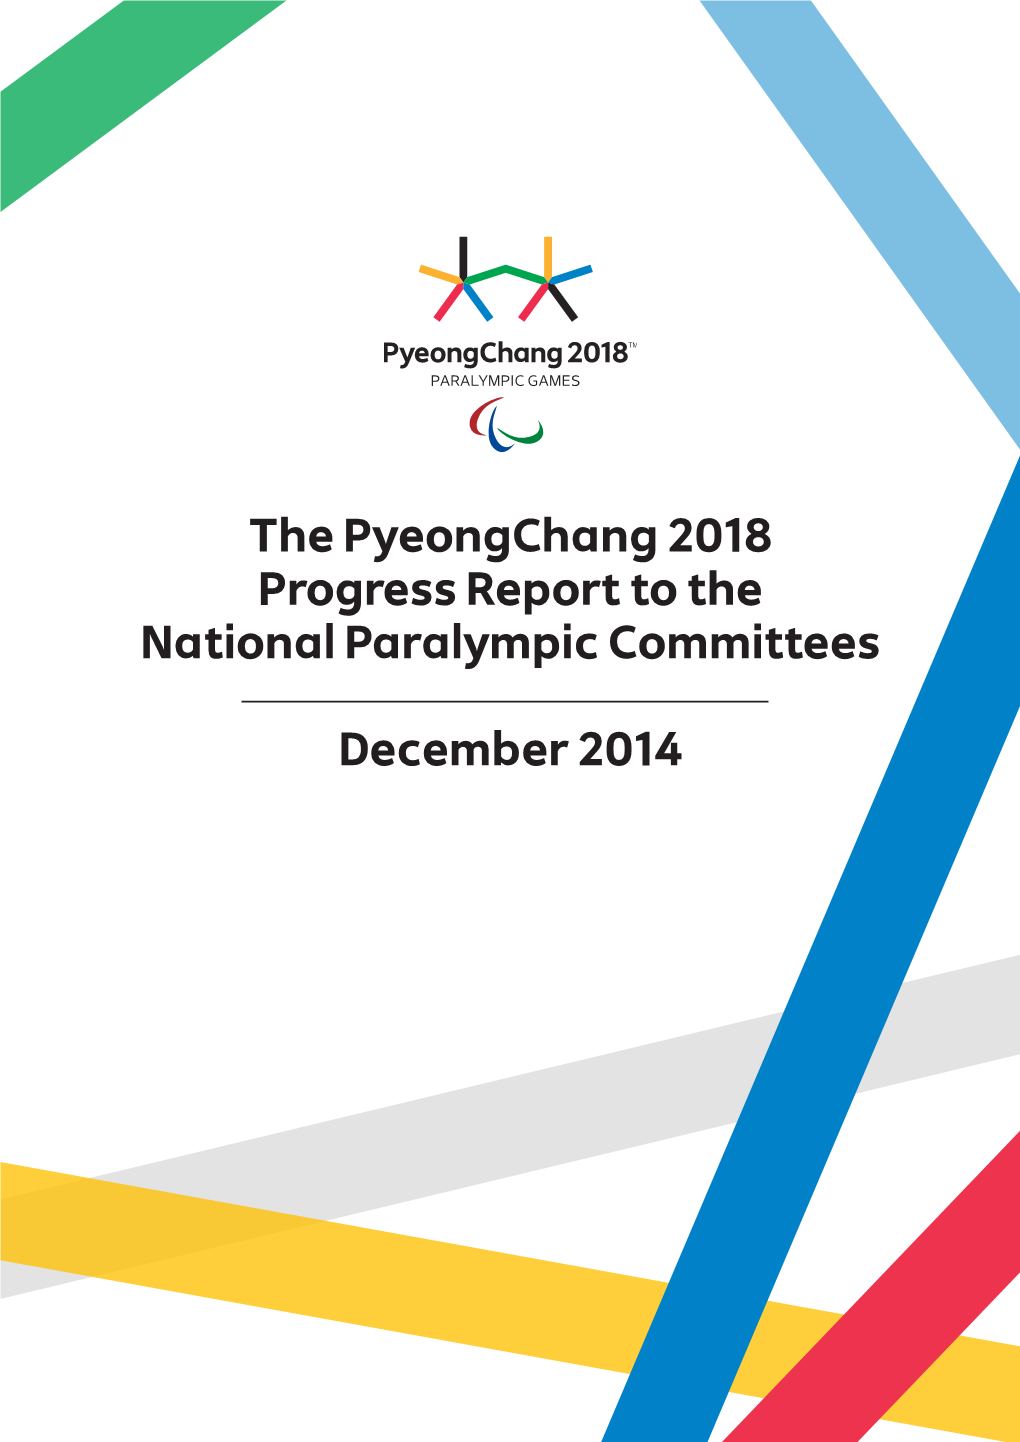 The Pyeongchang 2018 Progress Report to the National Paralympic Committees